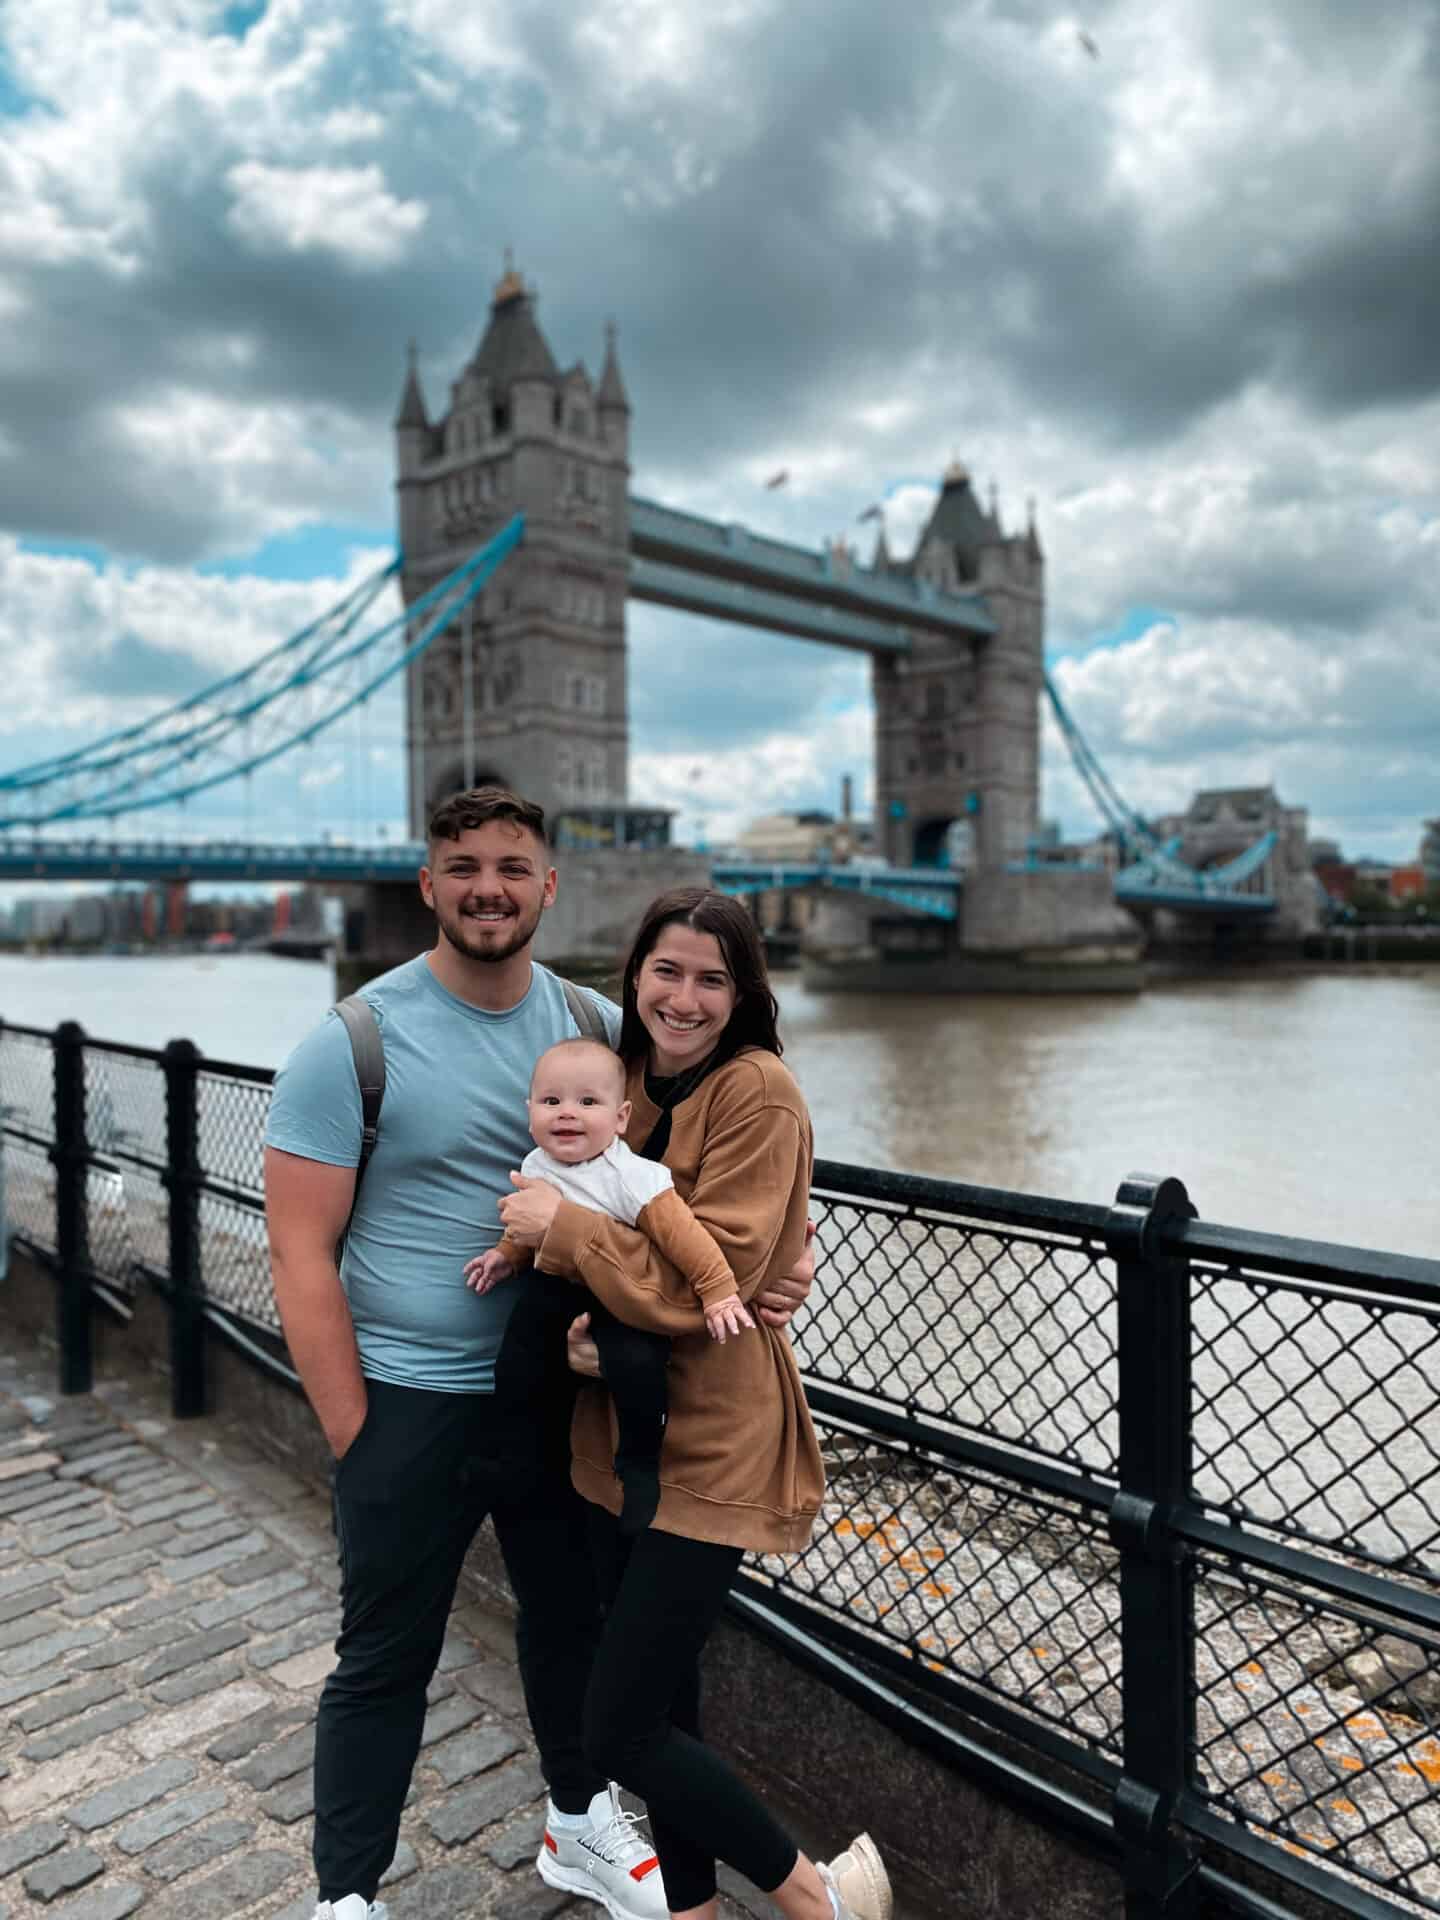 American family with baby posing for picture in front of Tower Bridge in London